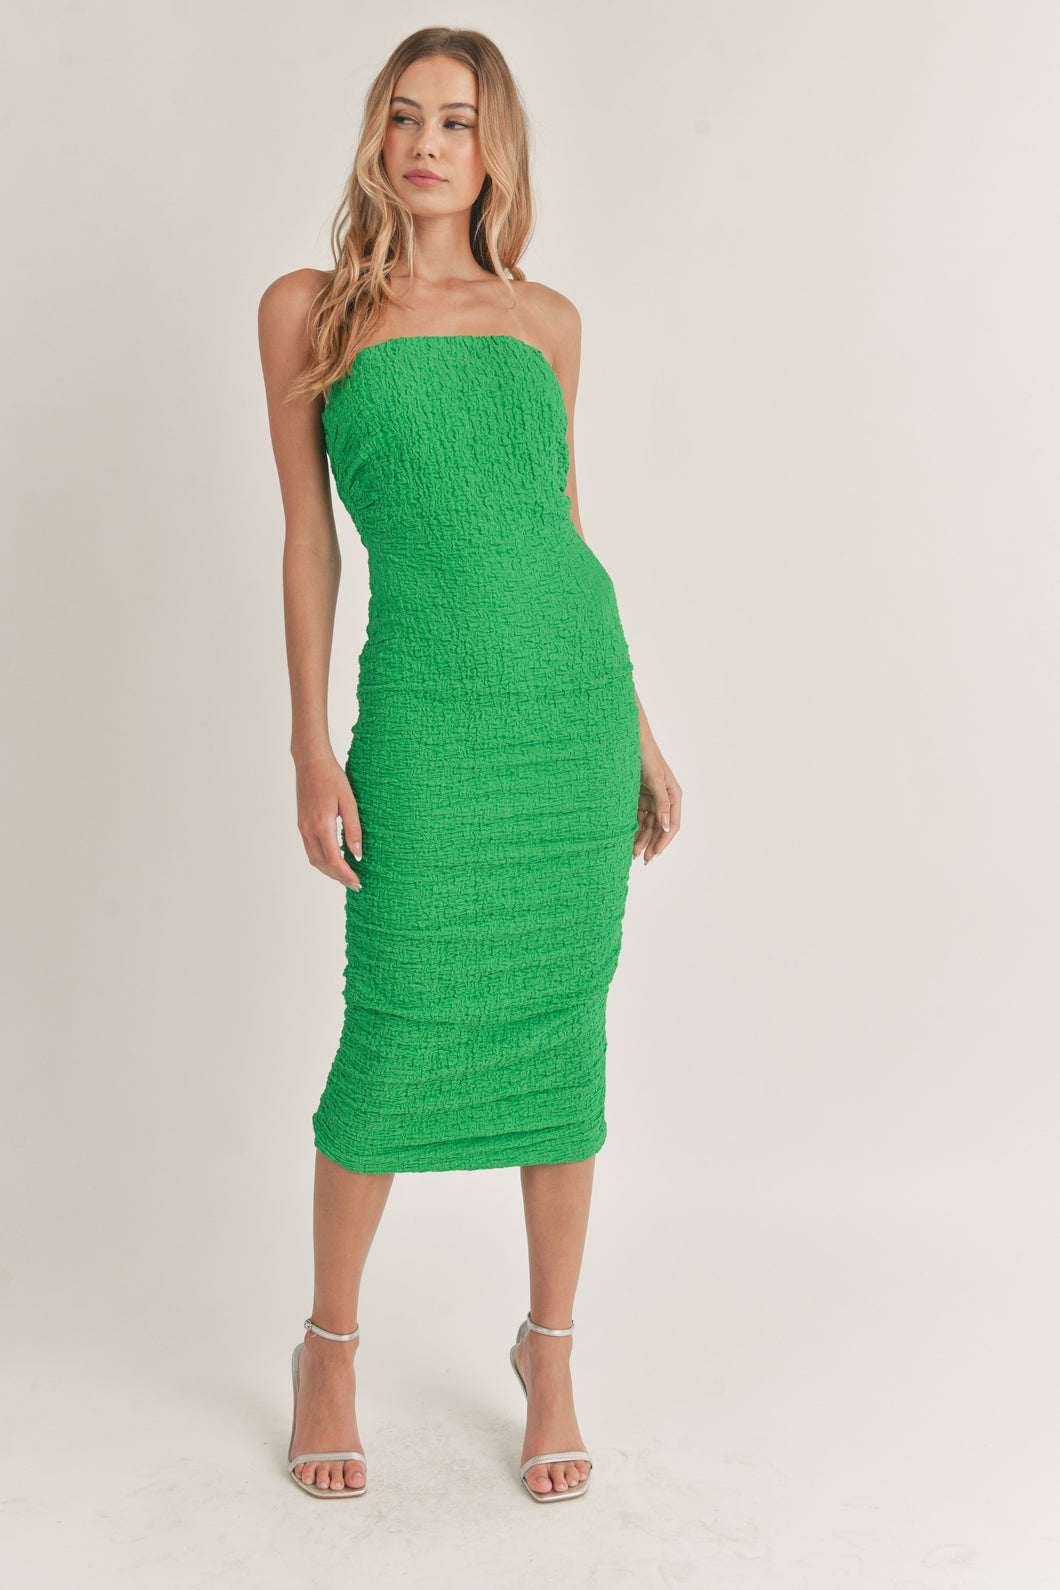 Color: Kelly Green Fitted/Bodycon fit Self: 90% polyester, 10% spandex; Lining: 100% polyester Model is 5'5 and wearing a Small, Ruched, Midi dress, Classic Green, Strapless, Boned Bodice, Trendy, Summer, Sundress, Night Out